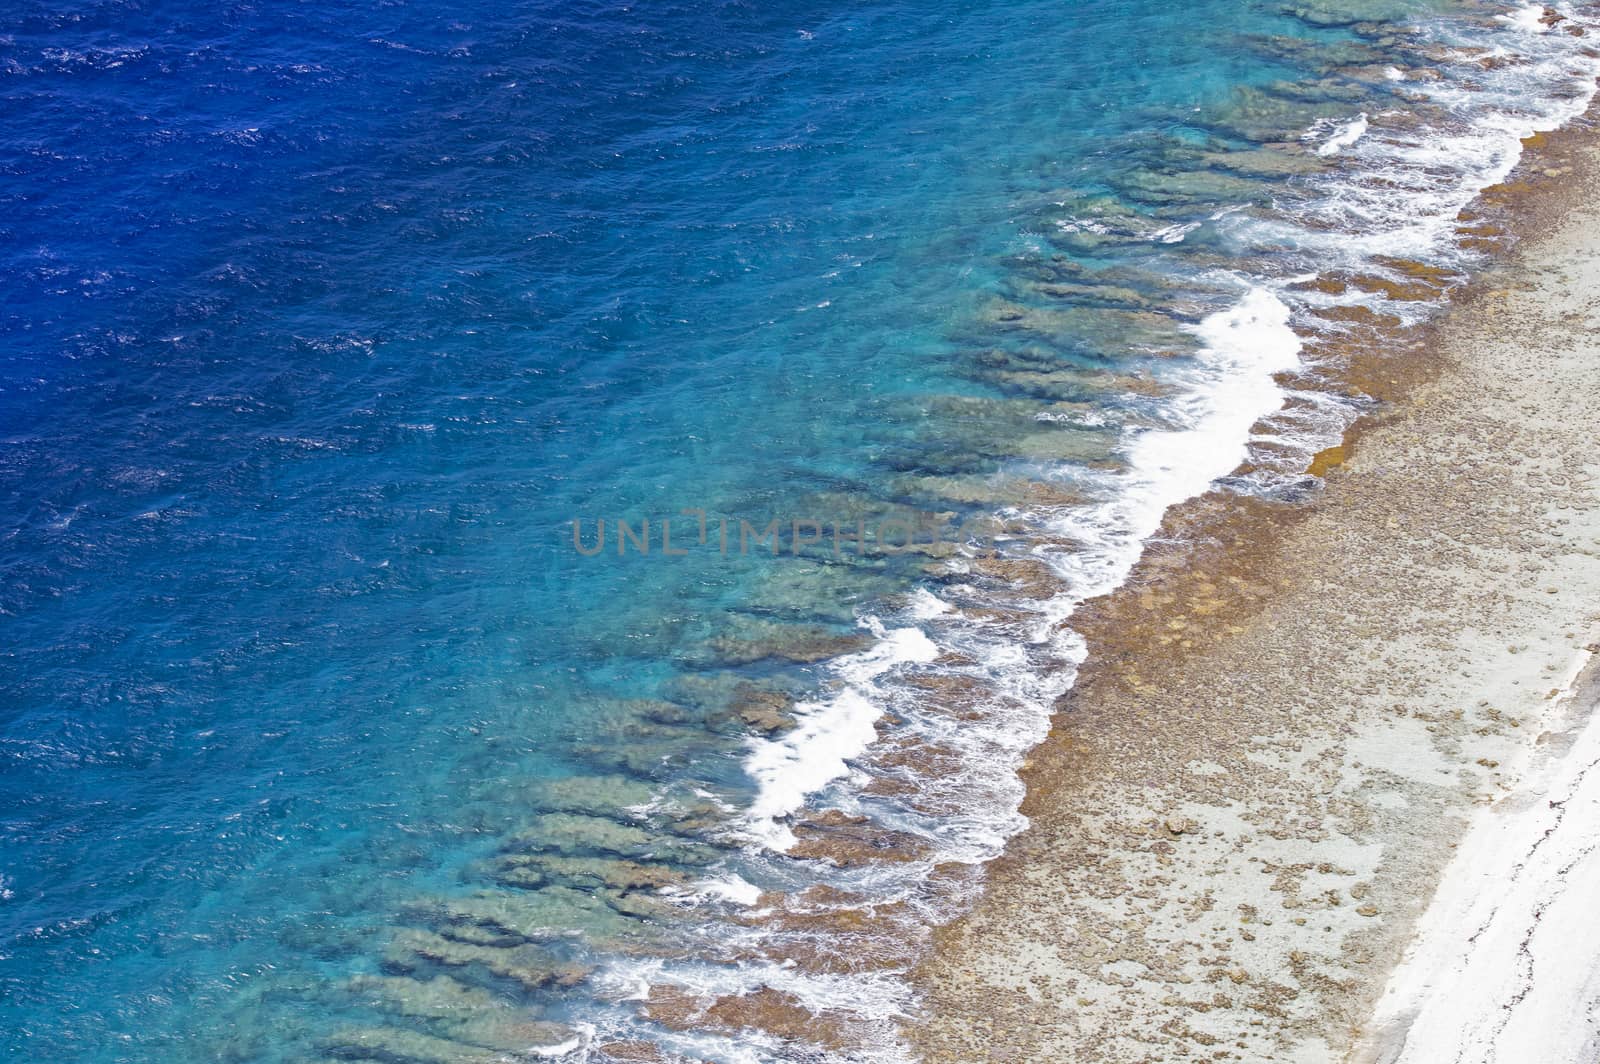 colorful aerial view of a beach in the pacific ocean